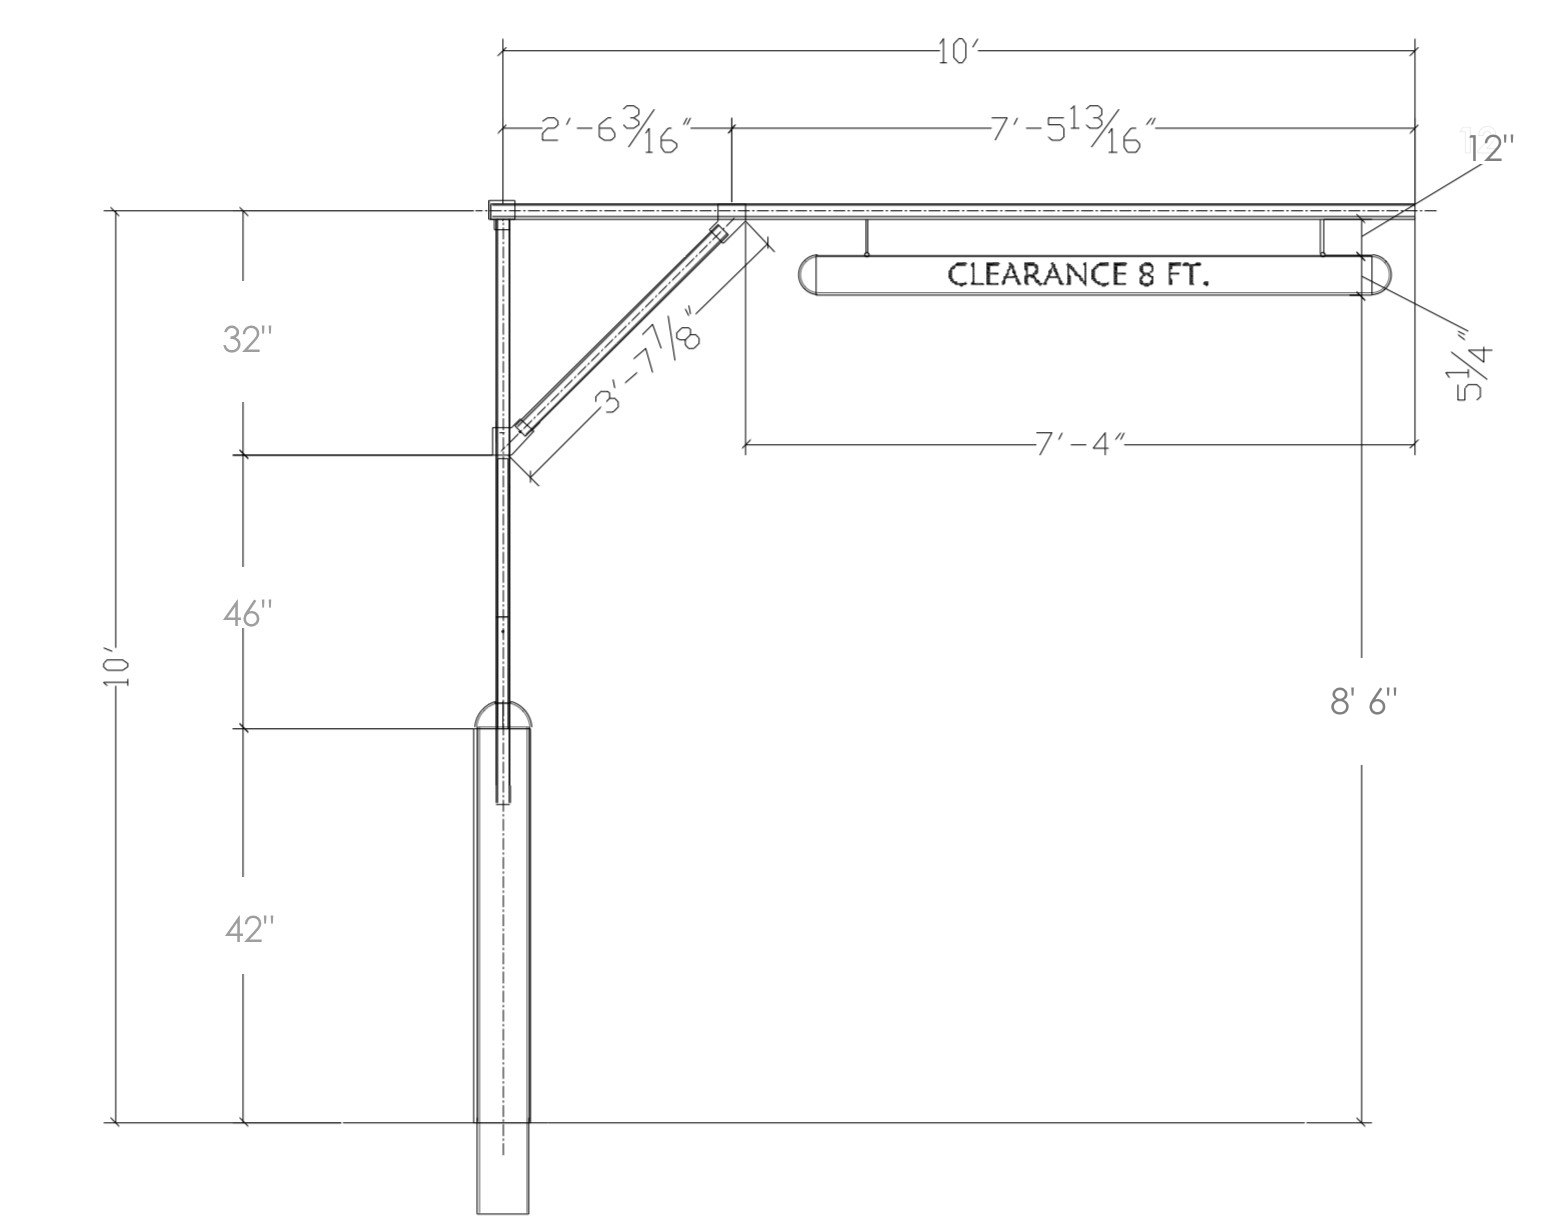 Free Standing Clearance Bar Dimensions